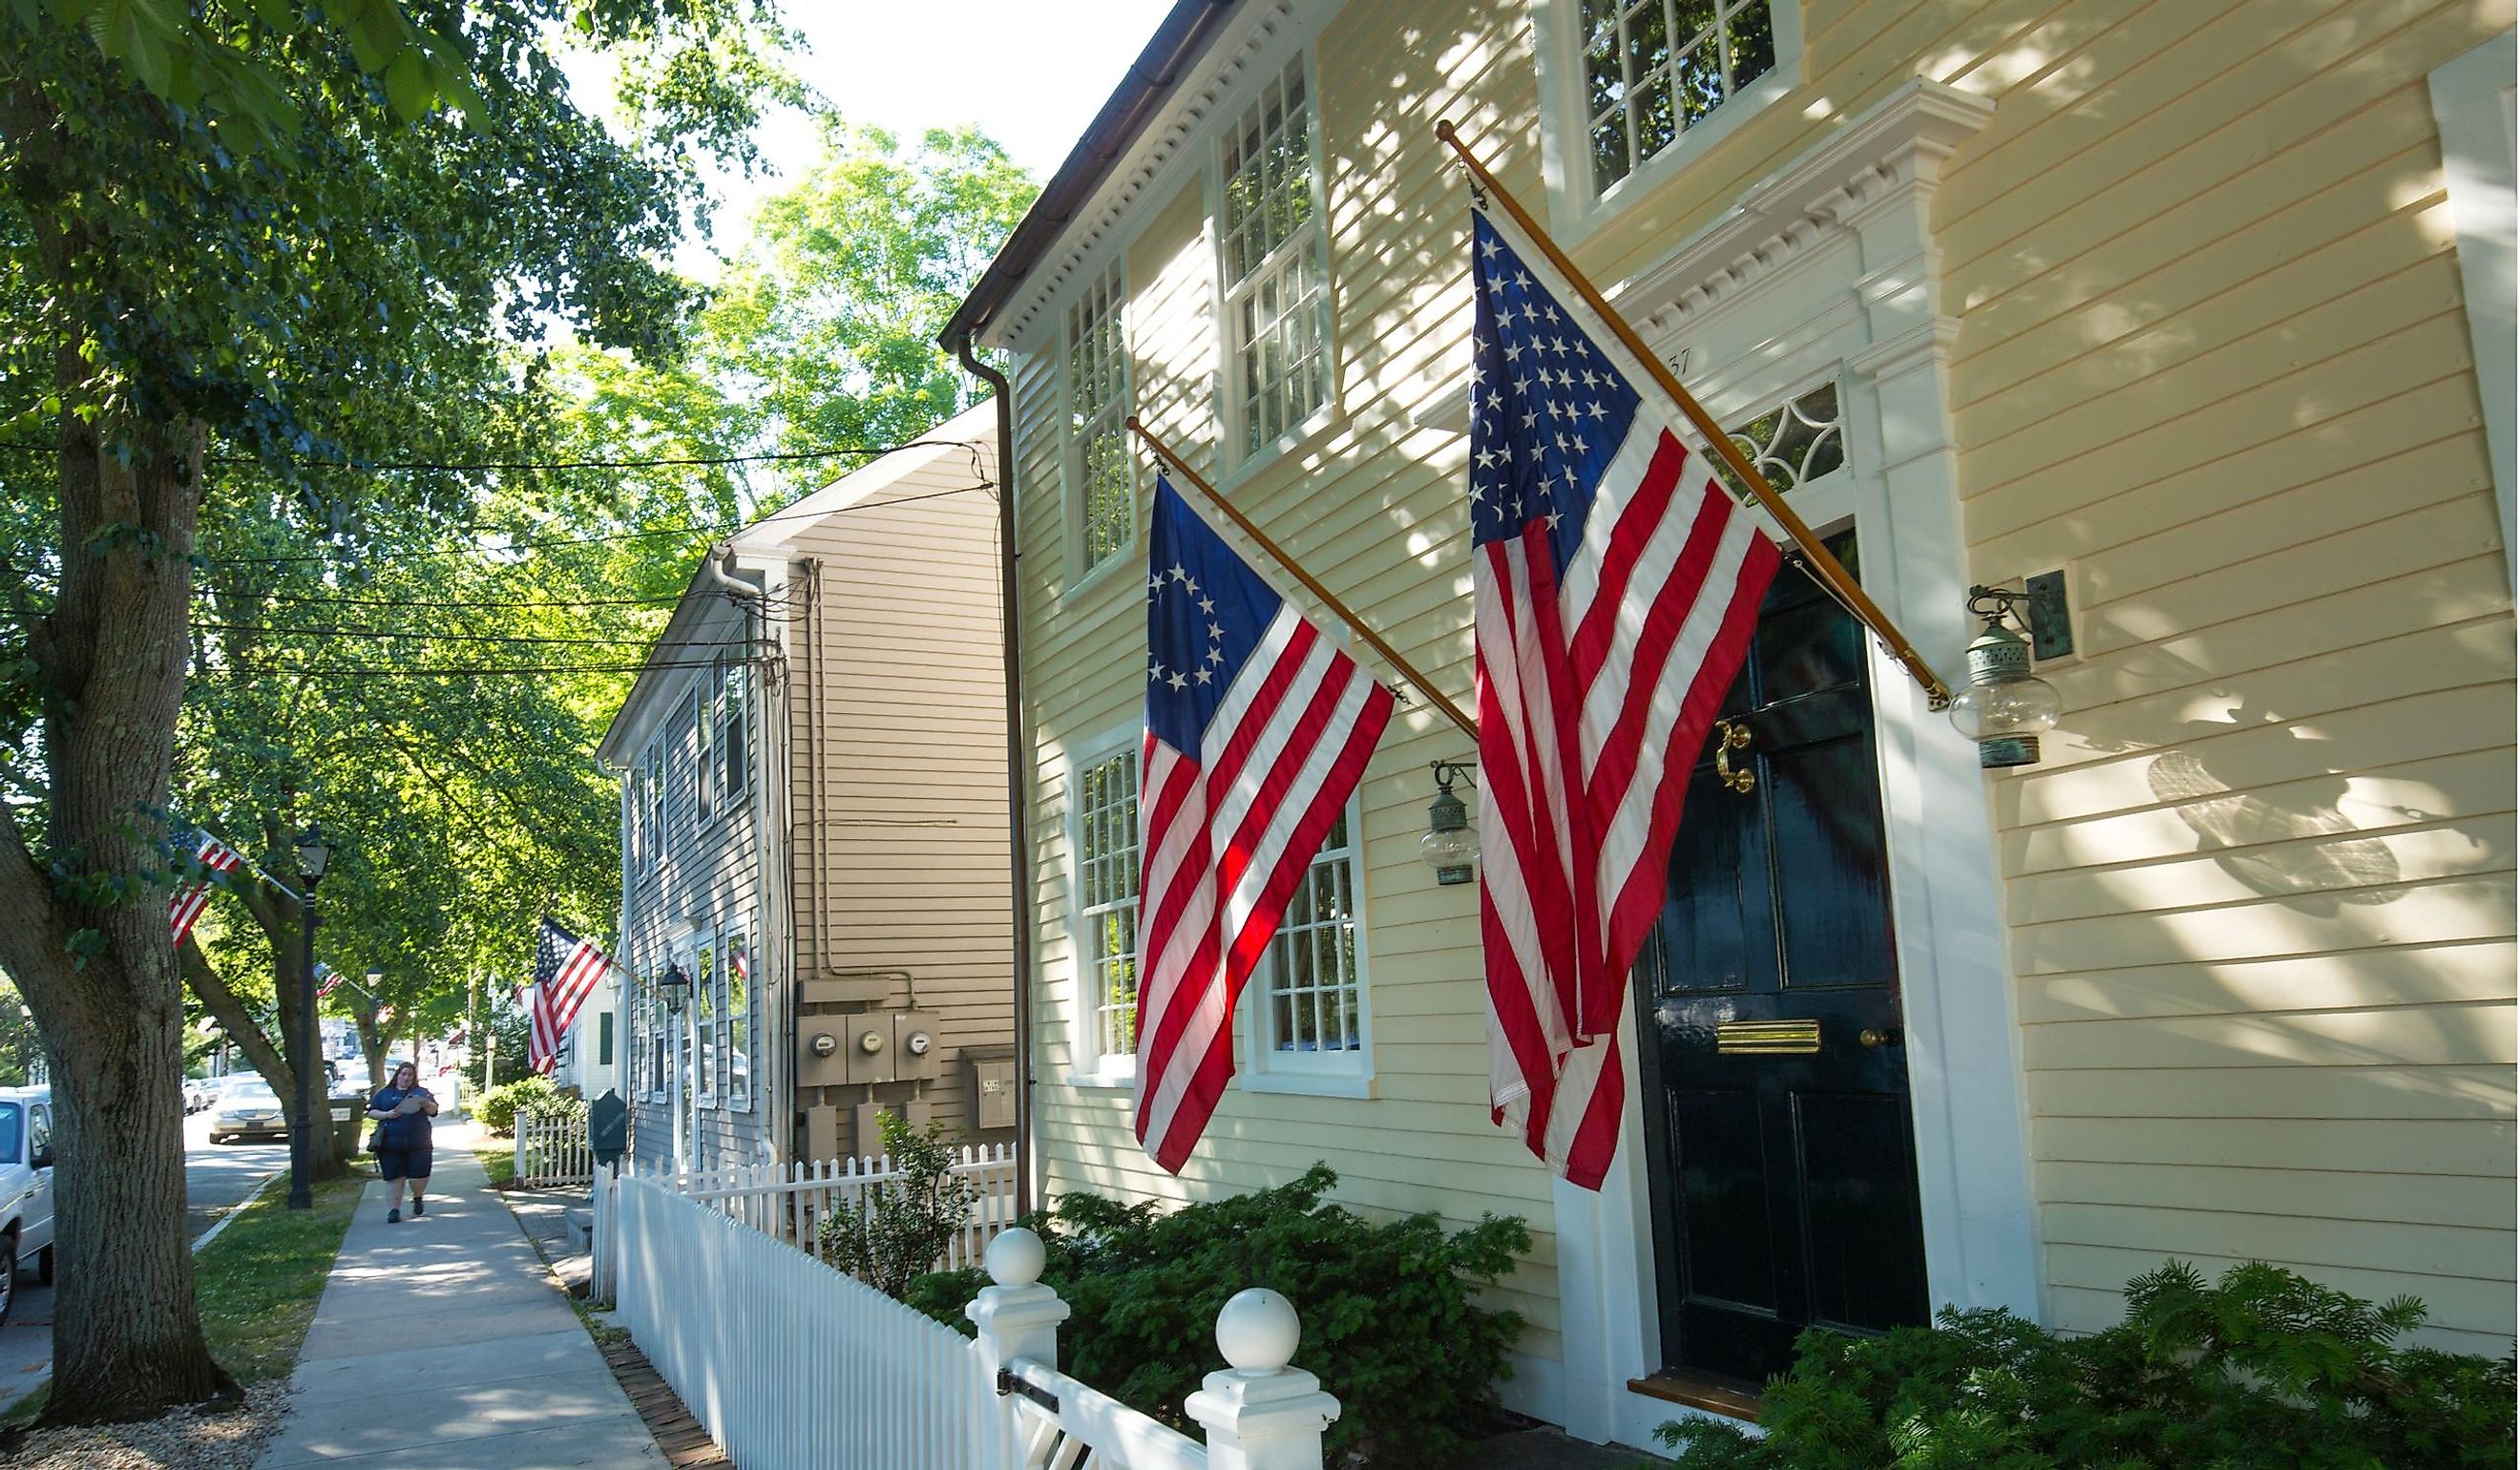 American flags and a white picket fence line Main Street in Essex, Ct. Editorial credit: Jeff Holcombe / Shutterstock.com